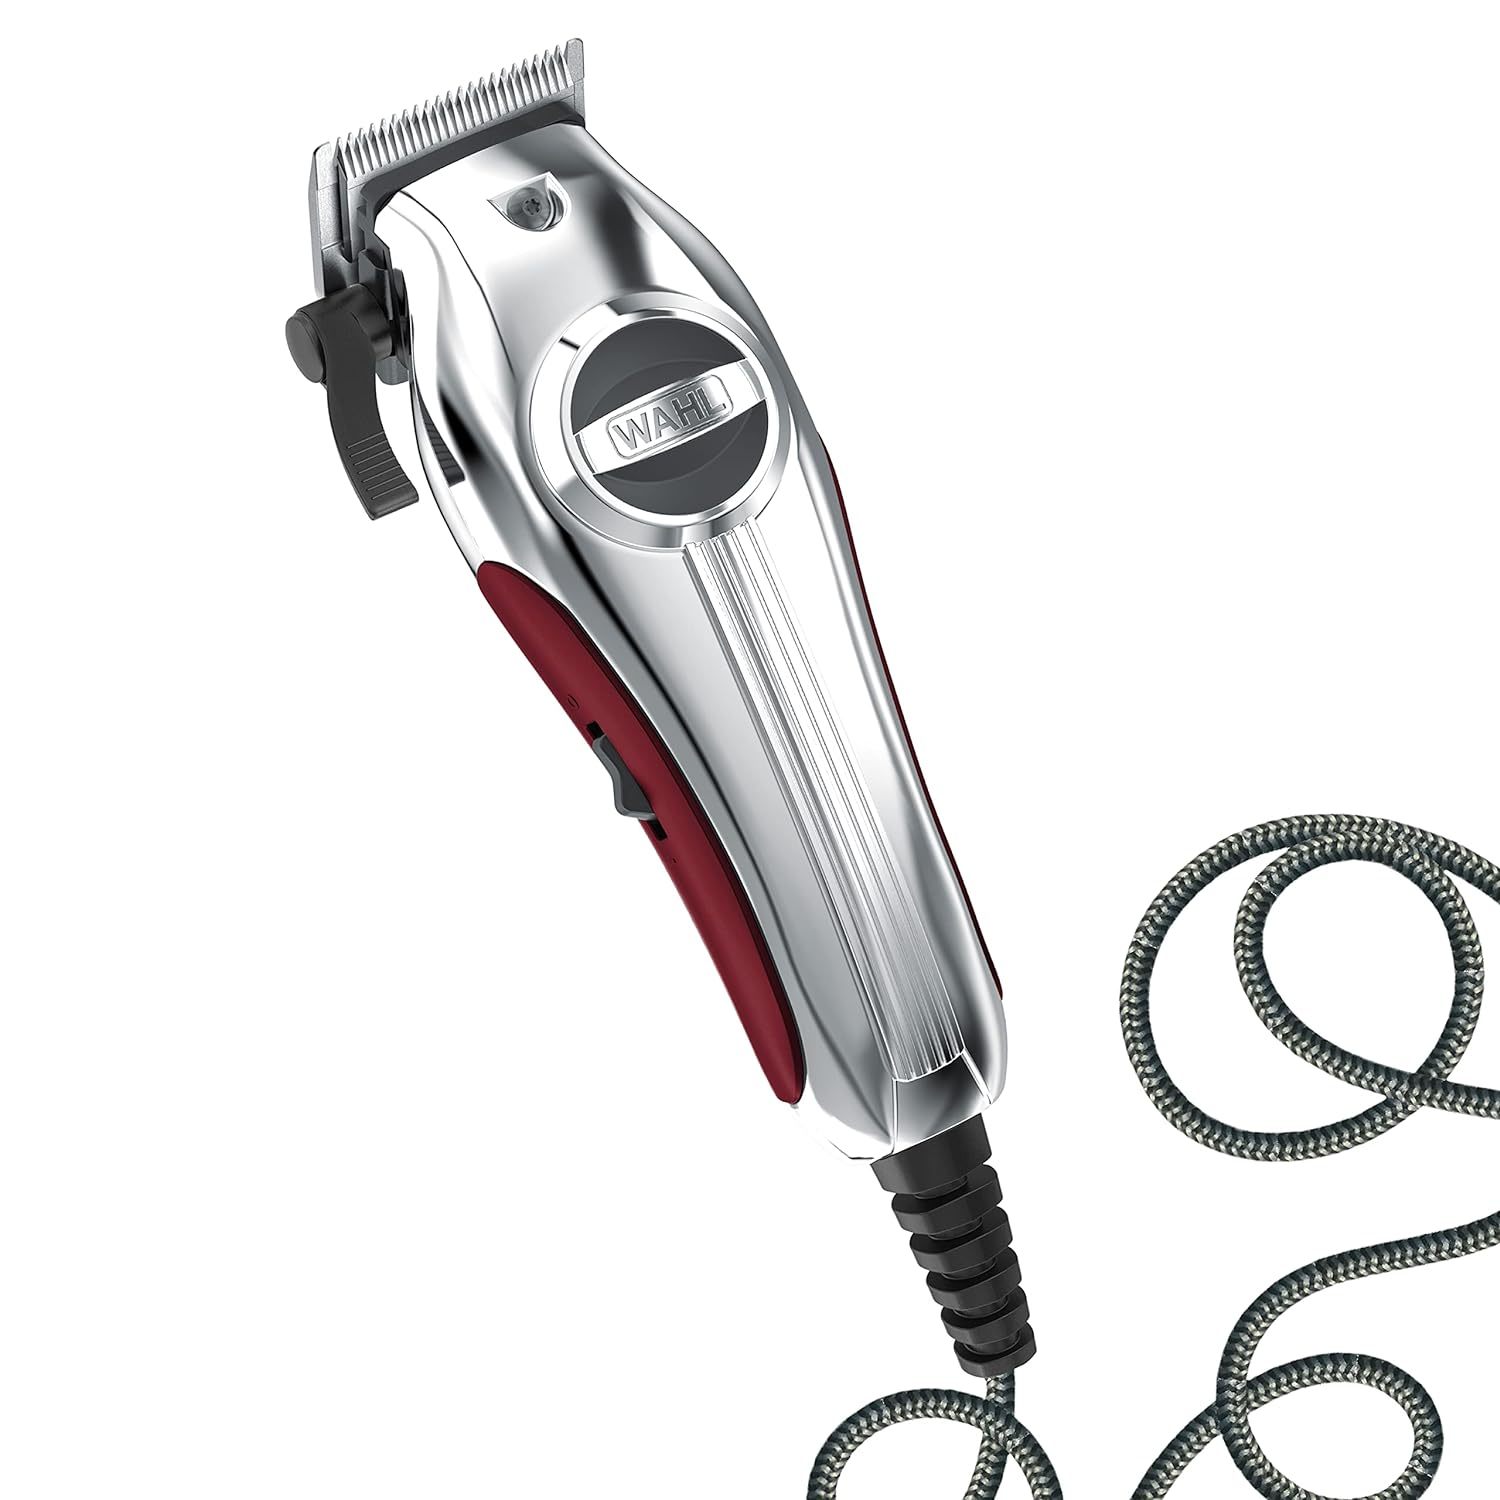 Model 3000097, By Wahl Usa, Is A Metal Hair Cutting Clipper, Quiet Operation. - $129.95